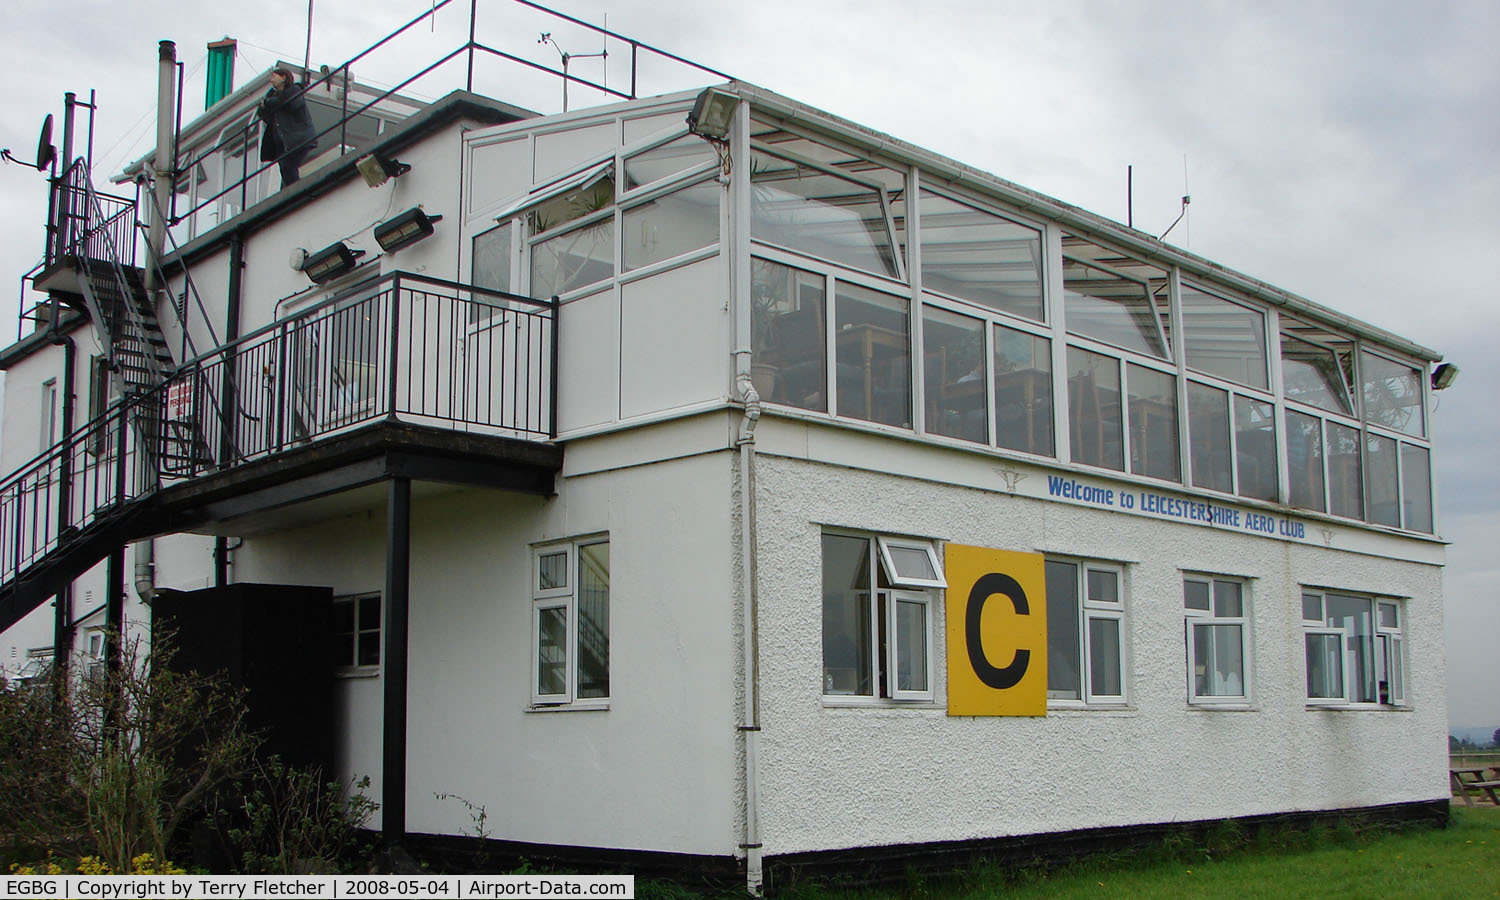 Leicester Airport, Leicester, England United Kingdom (EGBG) - Leicester Aero Club and Control Tower